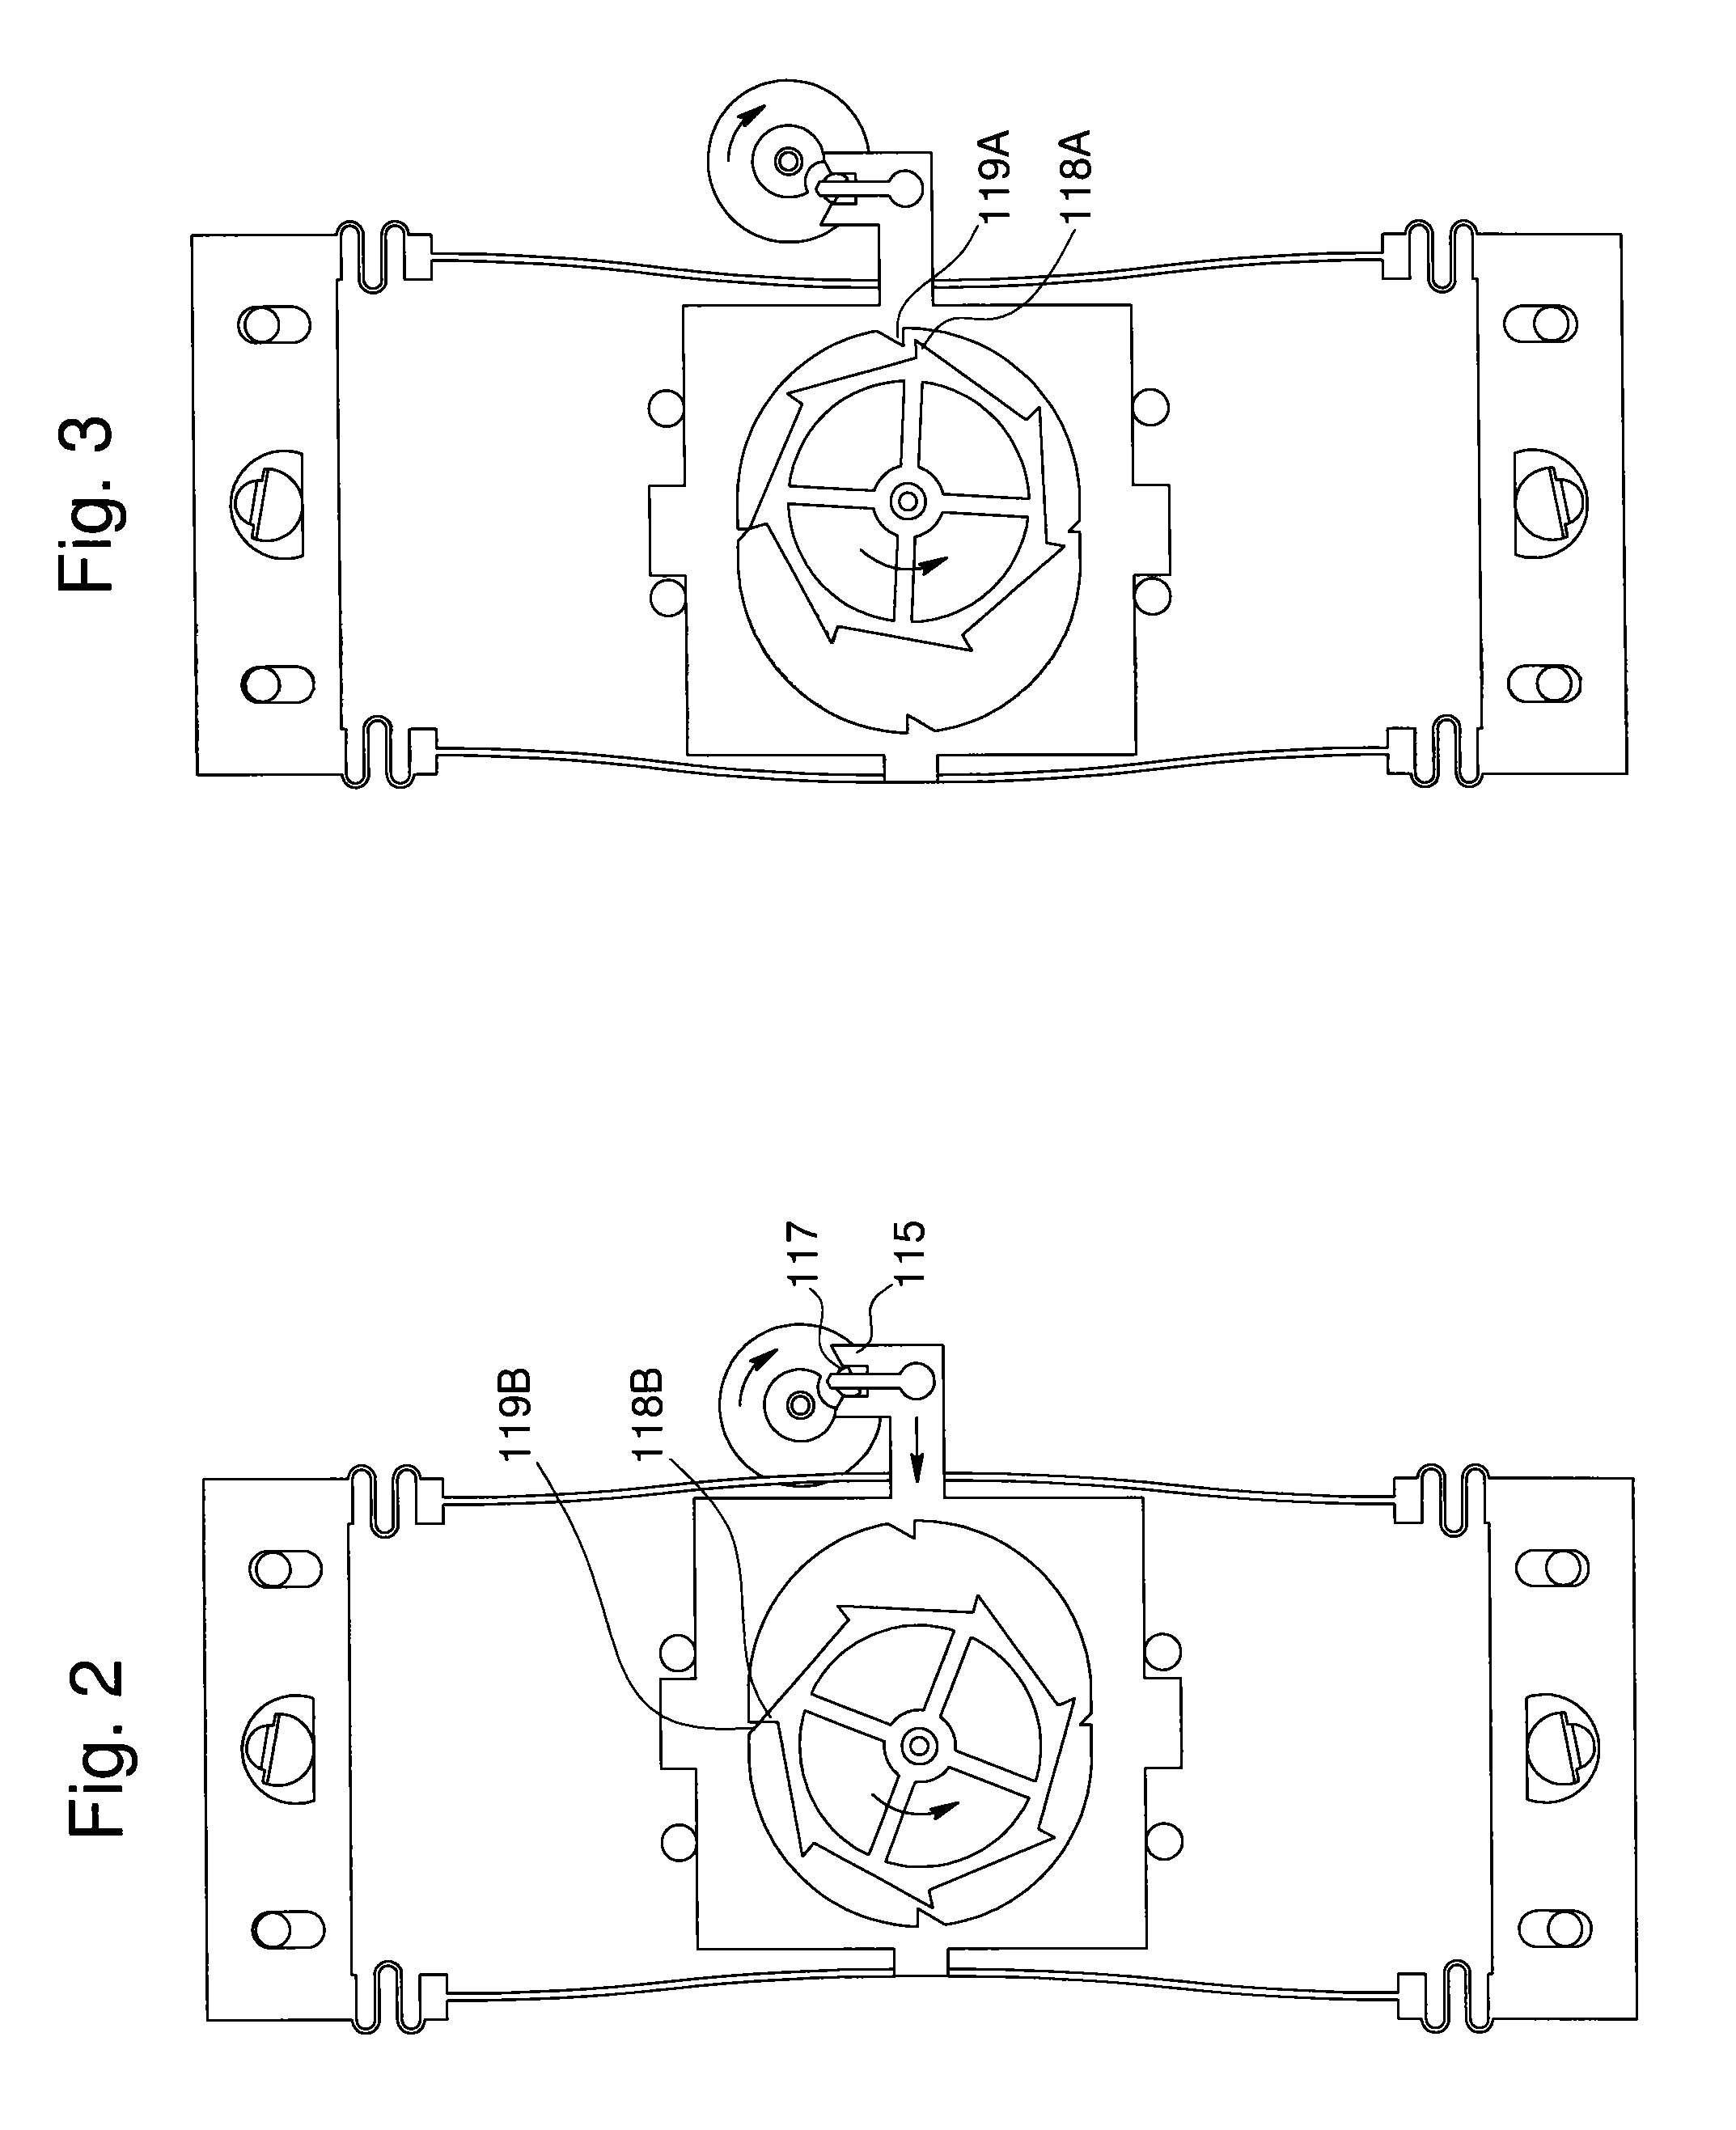 Flexible escapement mechanism with movable frame